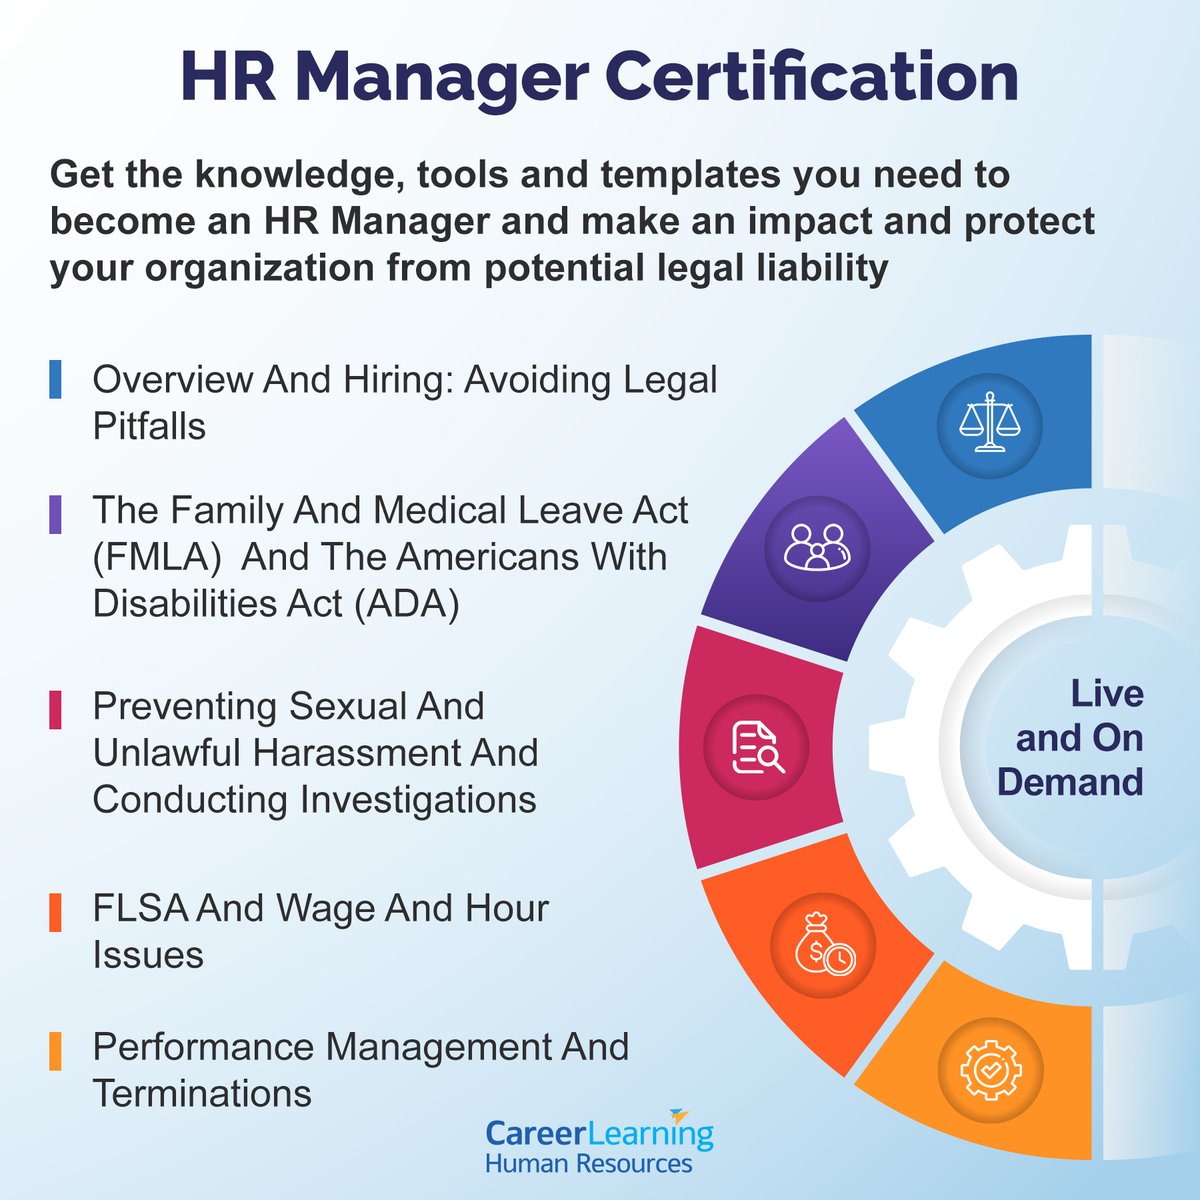 🚨HR Manager Certificate Program starts 6/3! bit.ly/HRMgrCert2024 This program will give you the knowledge, tools, and templates you need to succeed as an HR team of one. #HR #HumanResources #HRManager #HRDOO #HRDeptofOne #CareerLearning